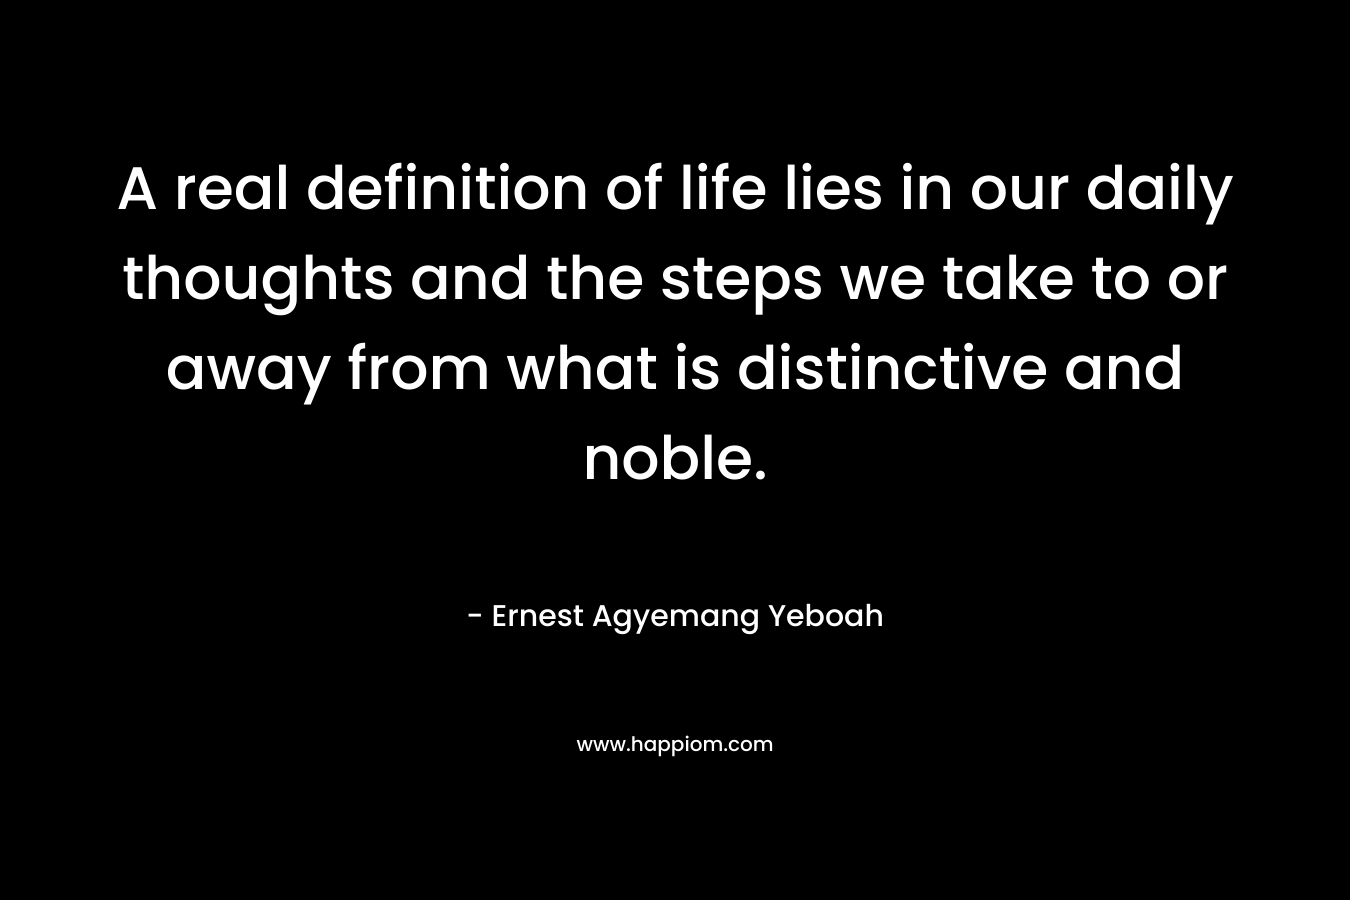 A real definition of life lies in our daily thoughts and the steps we take to or away from what is distinctive and noble.